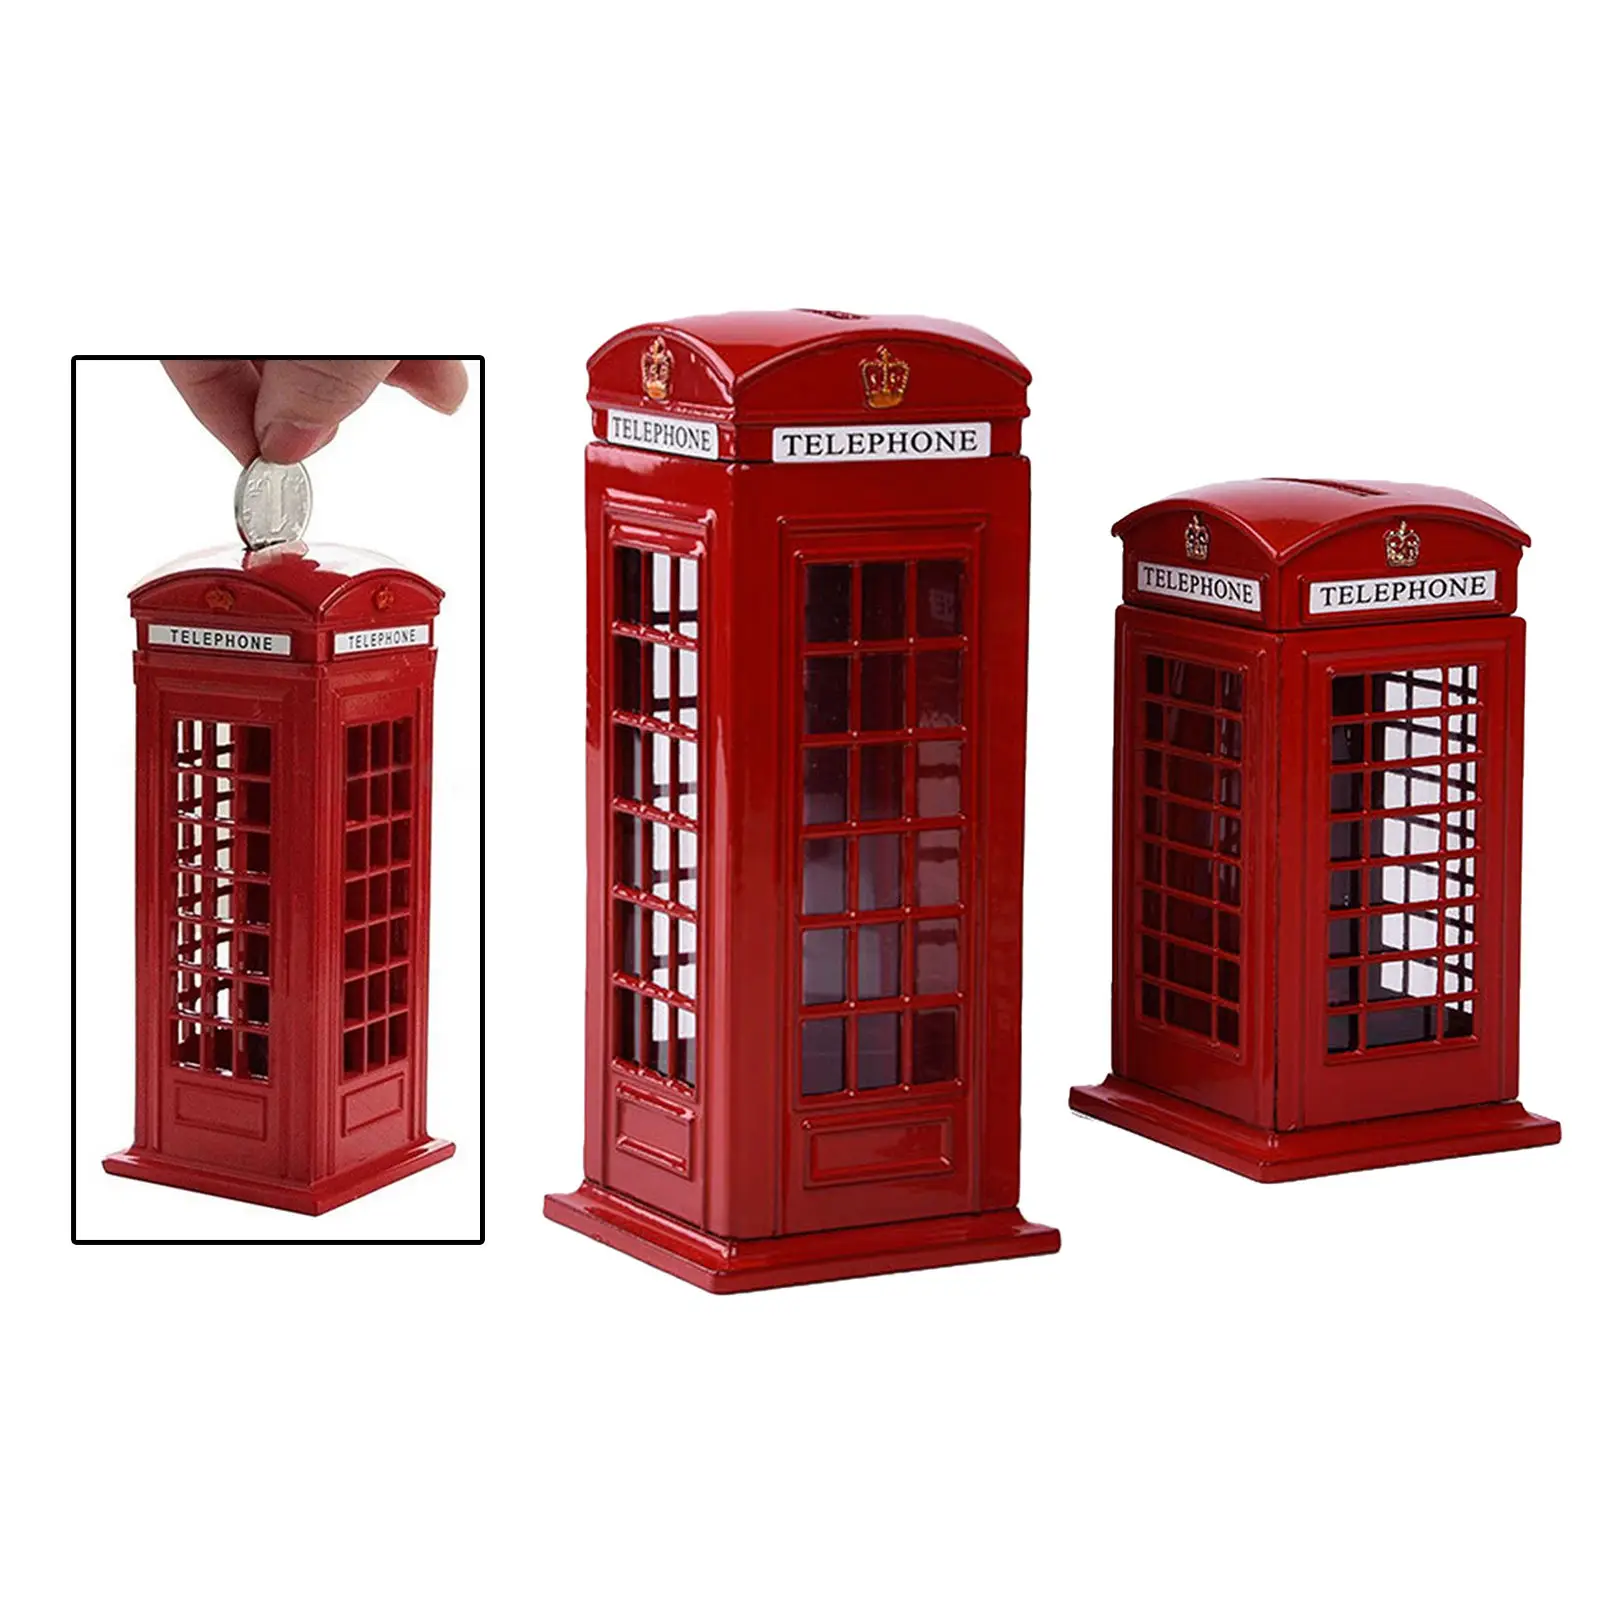 Telephone Booth Piggy Bank Creative London Style Telephone Booth Post Money Saving Box Home Decor Souvenir Gift for Kids Adults